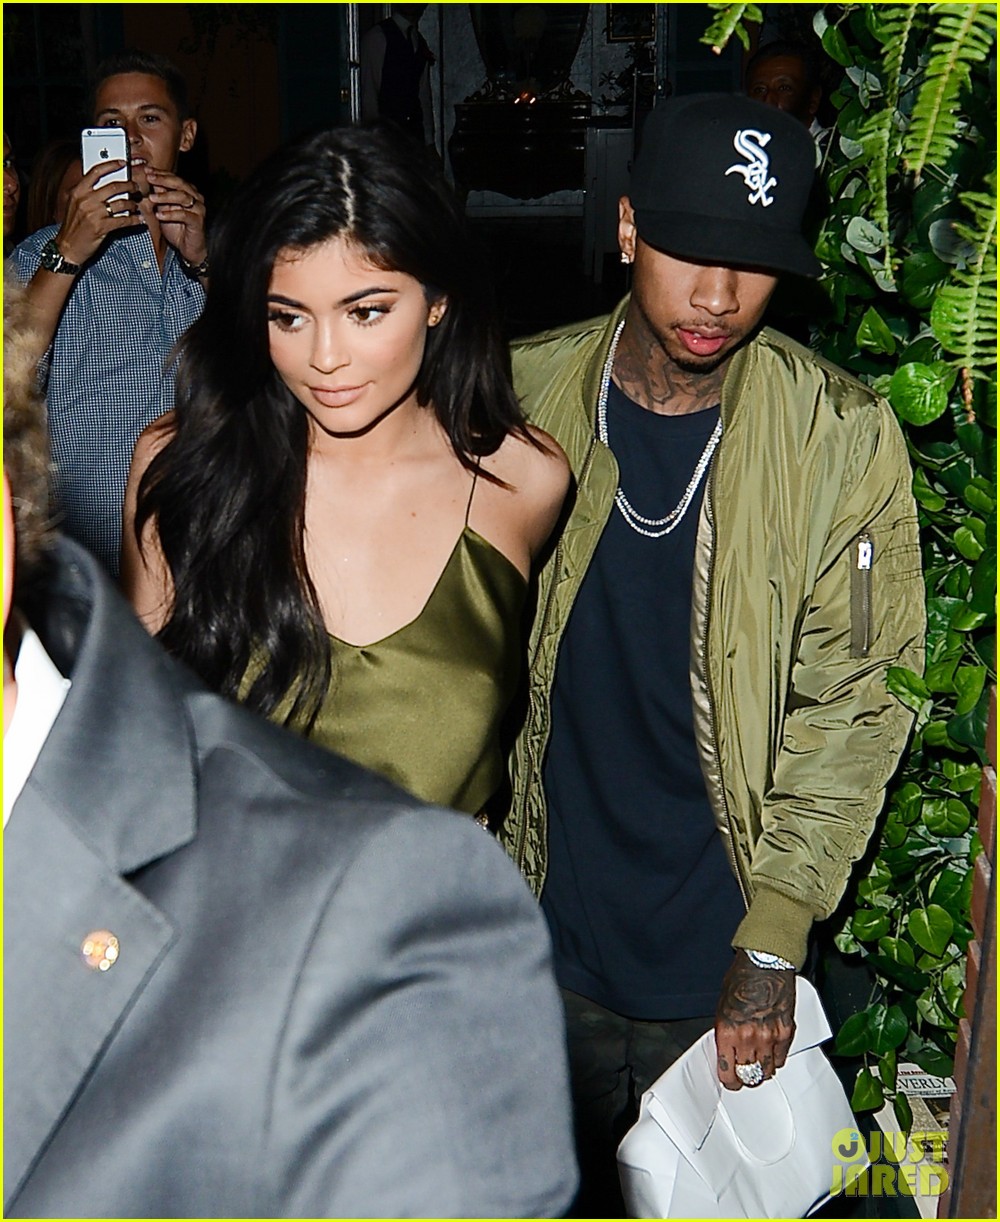 kylie jenner tyga dinner il cielo green outfits 12